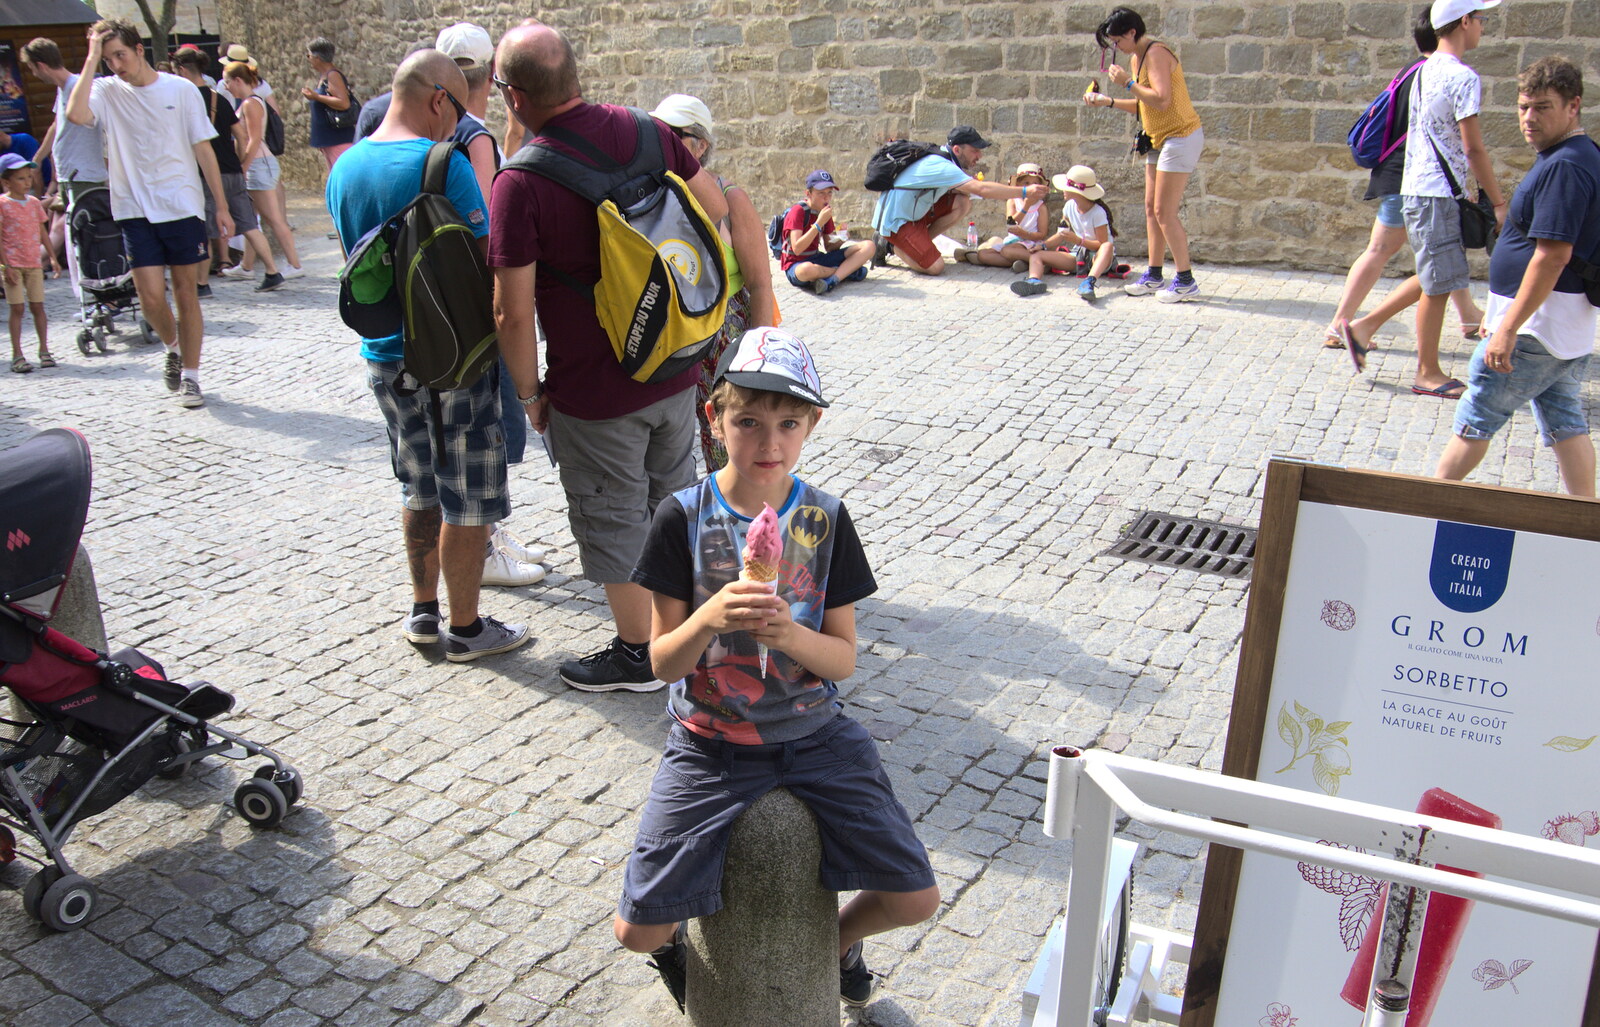 Fred eats his ice cream from The Château Comtal, Lastours and the Journey Home, Carcassonne, Aude, France - 14th August 2018